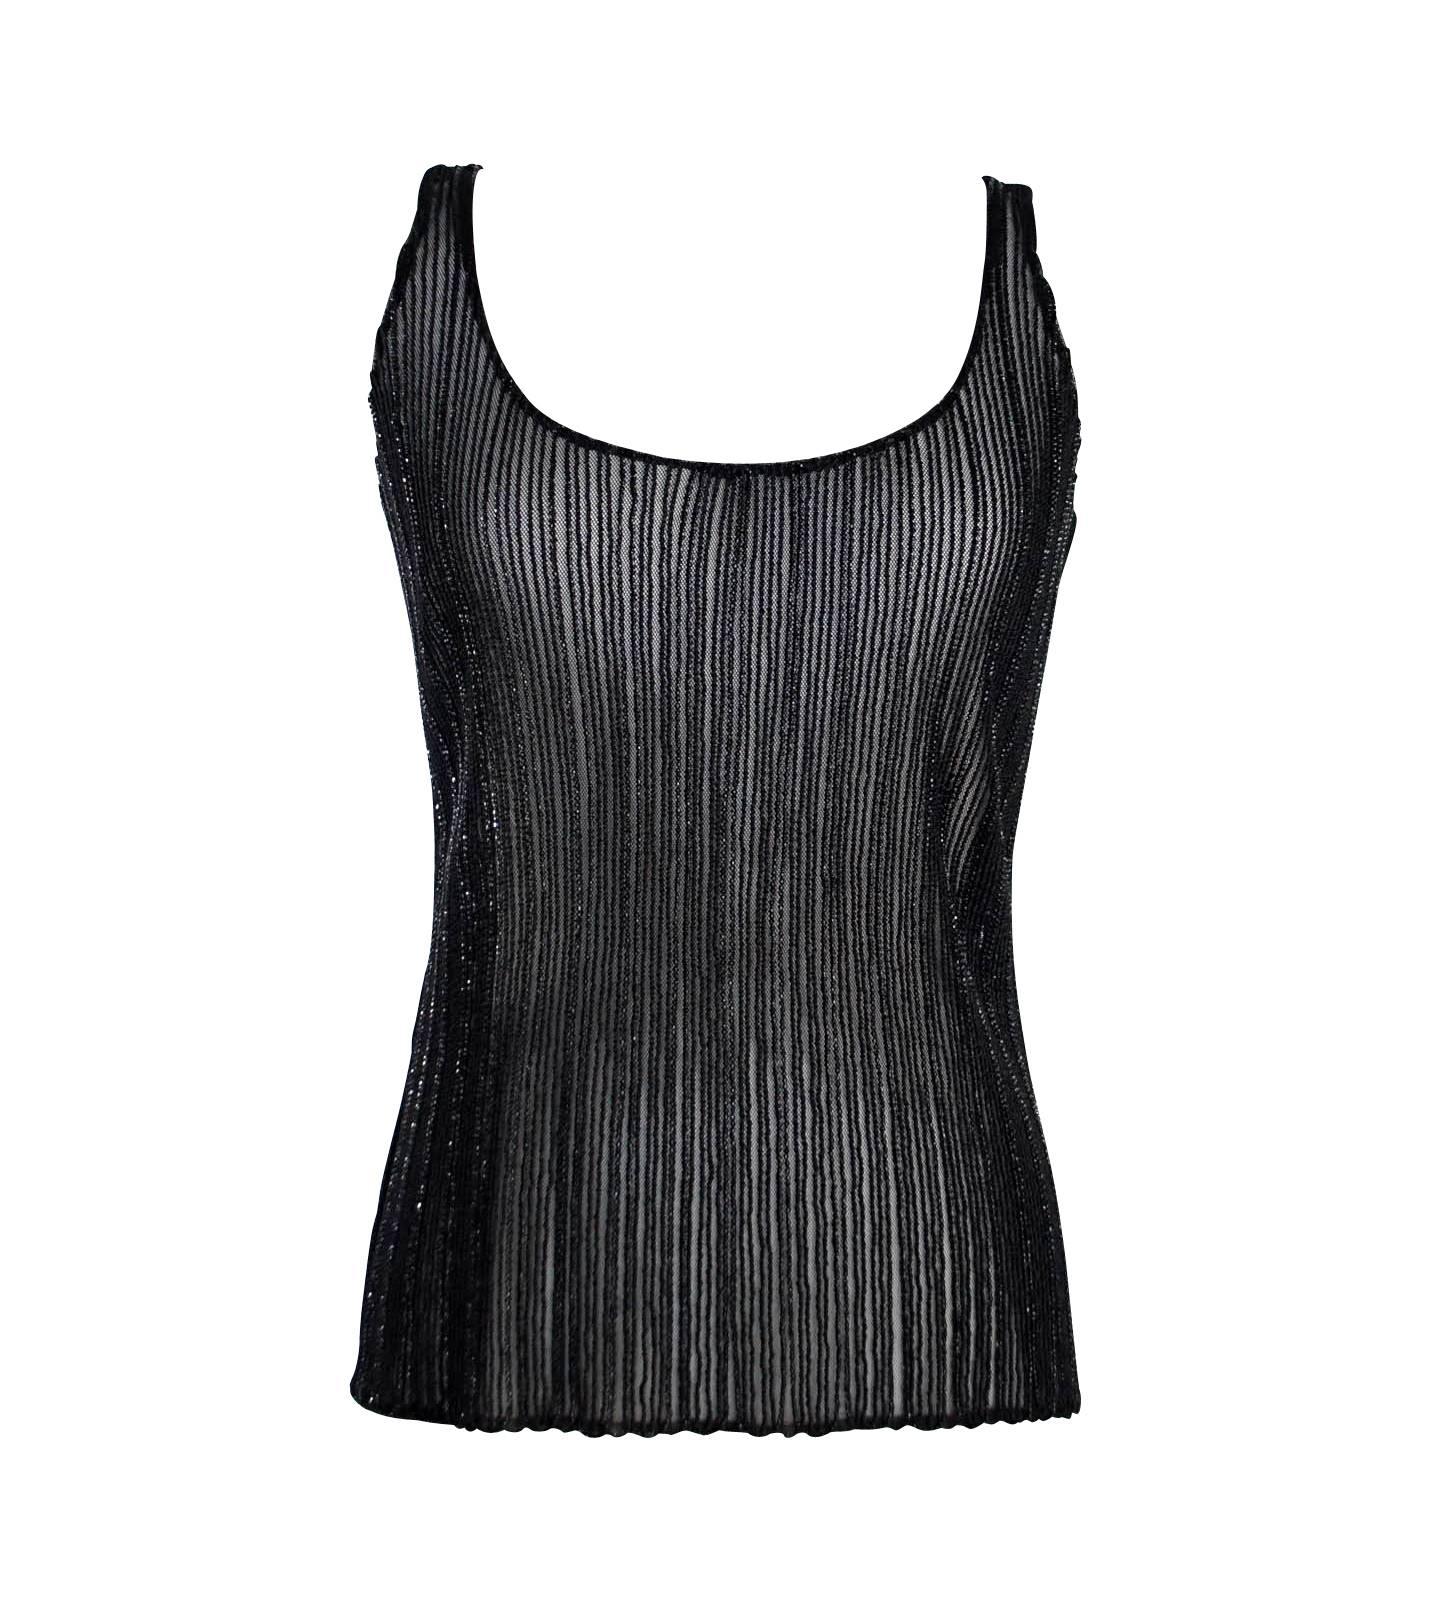 Guaranteed authentic Emanuel Ungaro beautiful jet black beaded shell.
Detailed tiny black beads run down like a pinstripe.
Black embroidery running in lines between the beading.
Fabric is nylon and spandex.
NEW or NEVER WORN.
Mightychic has excelled